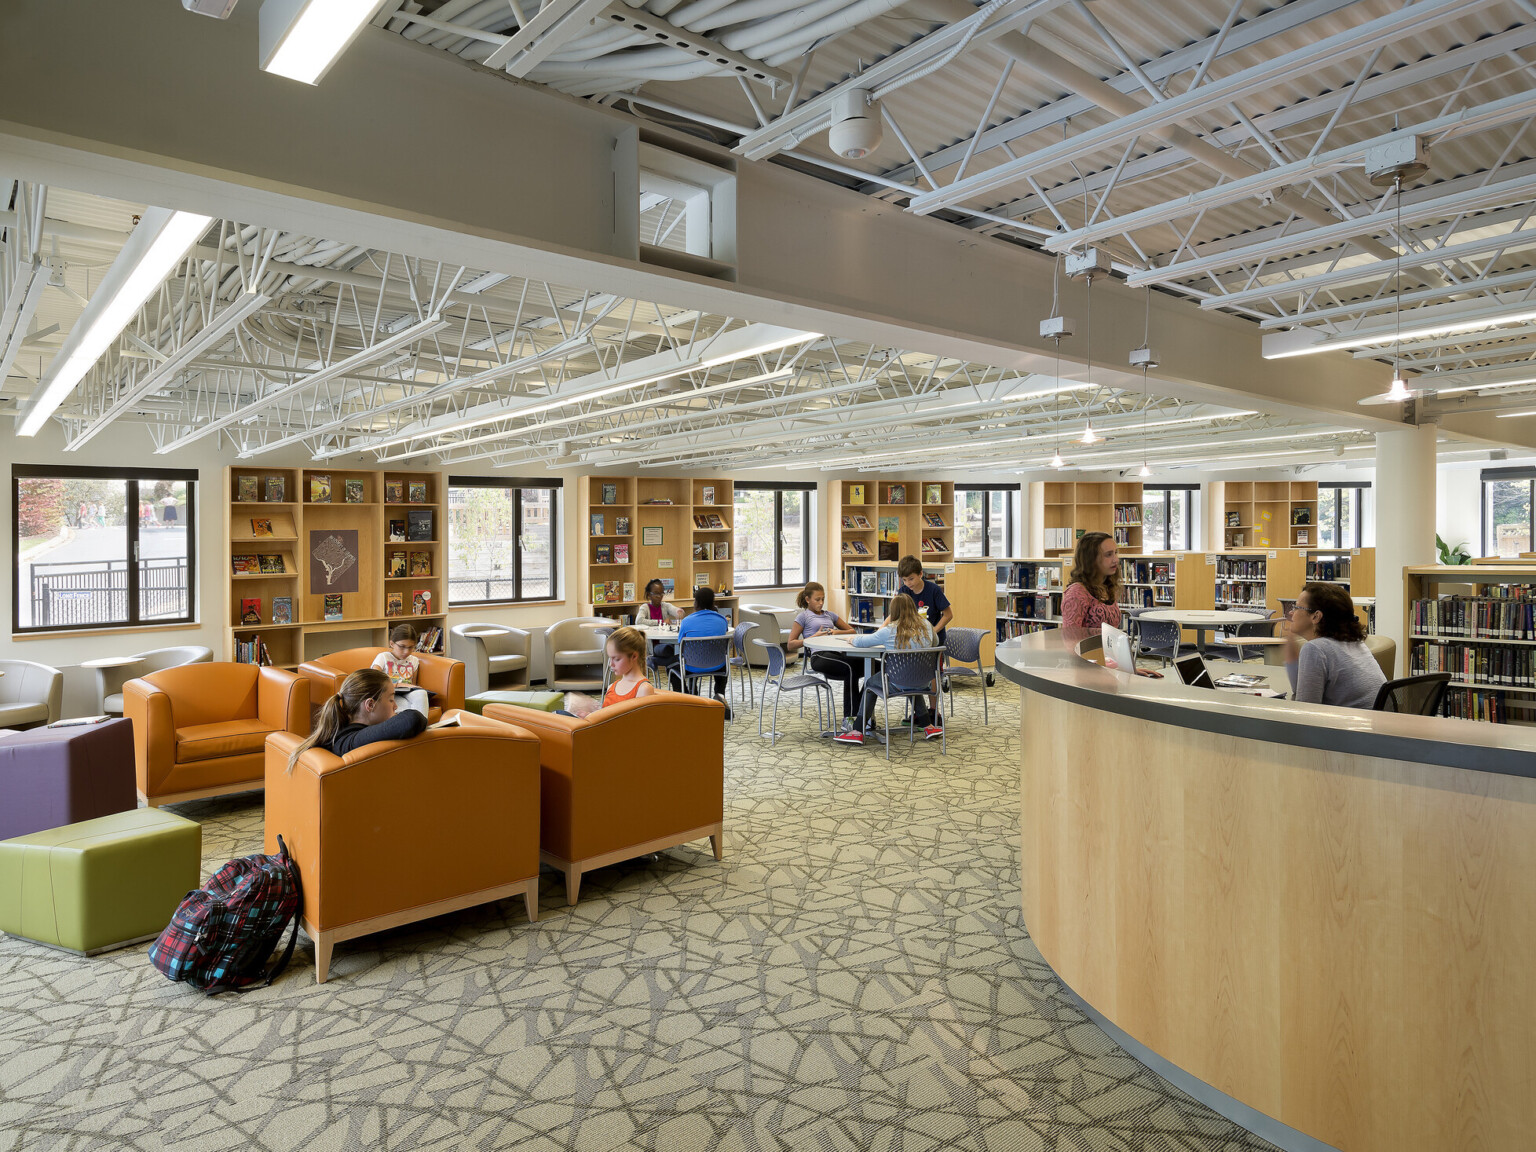 students and librarian in library on laptops among double-height ceilings, a bright, red round rug brings the groups together, natural daylight and skylights, comfy, modern orange leboucle-covered seating